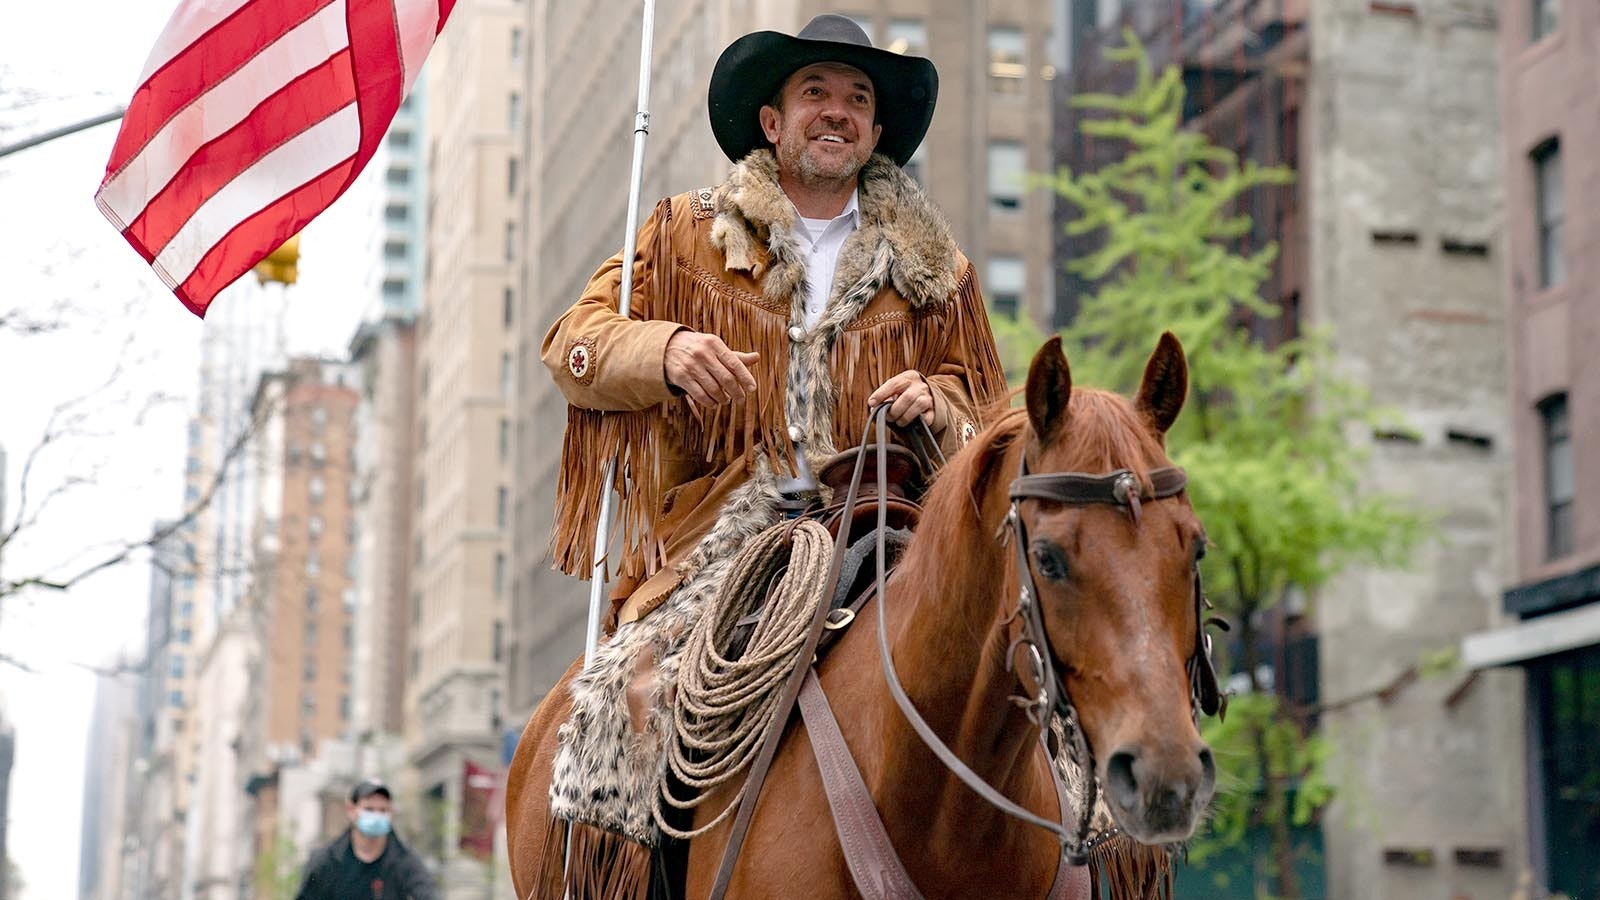 Cowboys for Trump co-founder Couy Griffin rides his horse on 5th Avenue in New York City on May 1, 2020. in New York City. Griffin, who was convicted for his participation in the Jan. 6, 2021, riot at the U.S. Capitol, has been invited to be a guest speaker at a Campbell County Republican Party event.